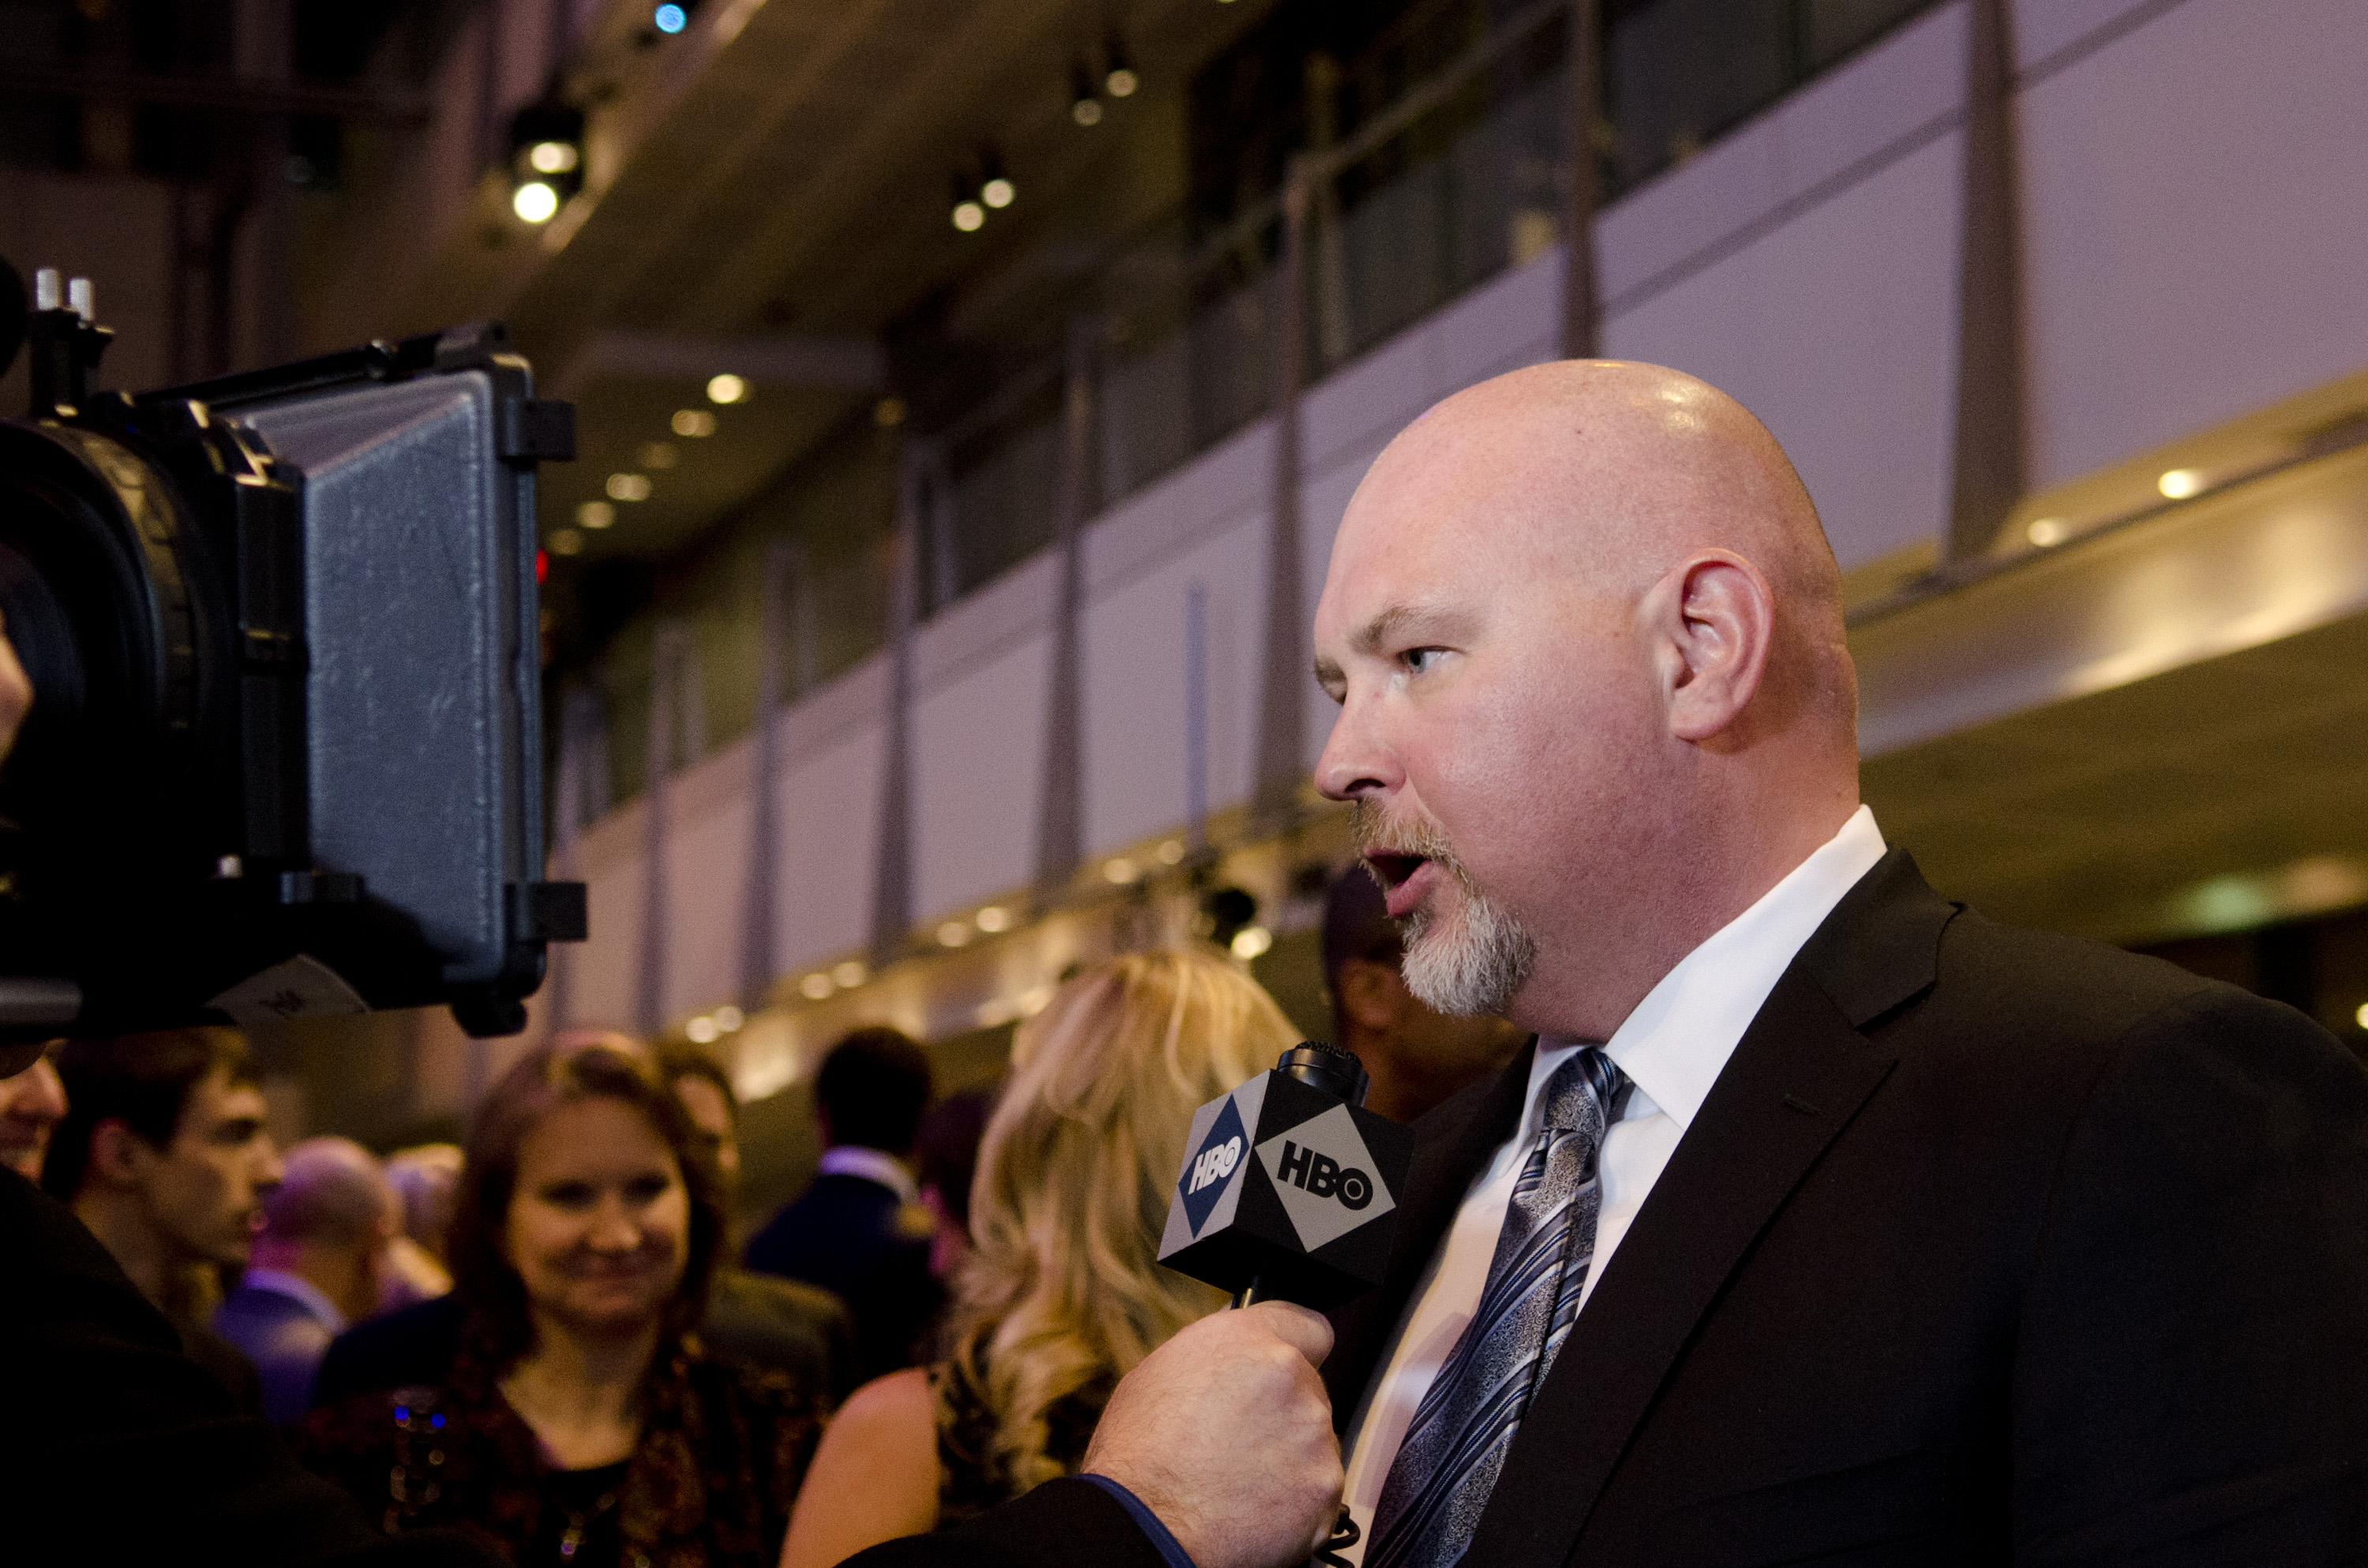 Steve Schmidt speaks with a reporter during the "Game Change" premiere at The Newseum on March 8, 2012 in Washington, DC. (Kris Connor&mdash;Getty Images)